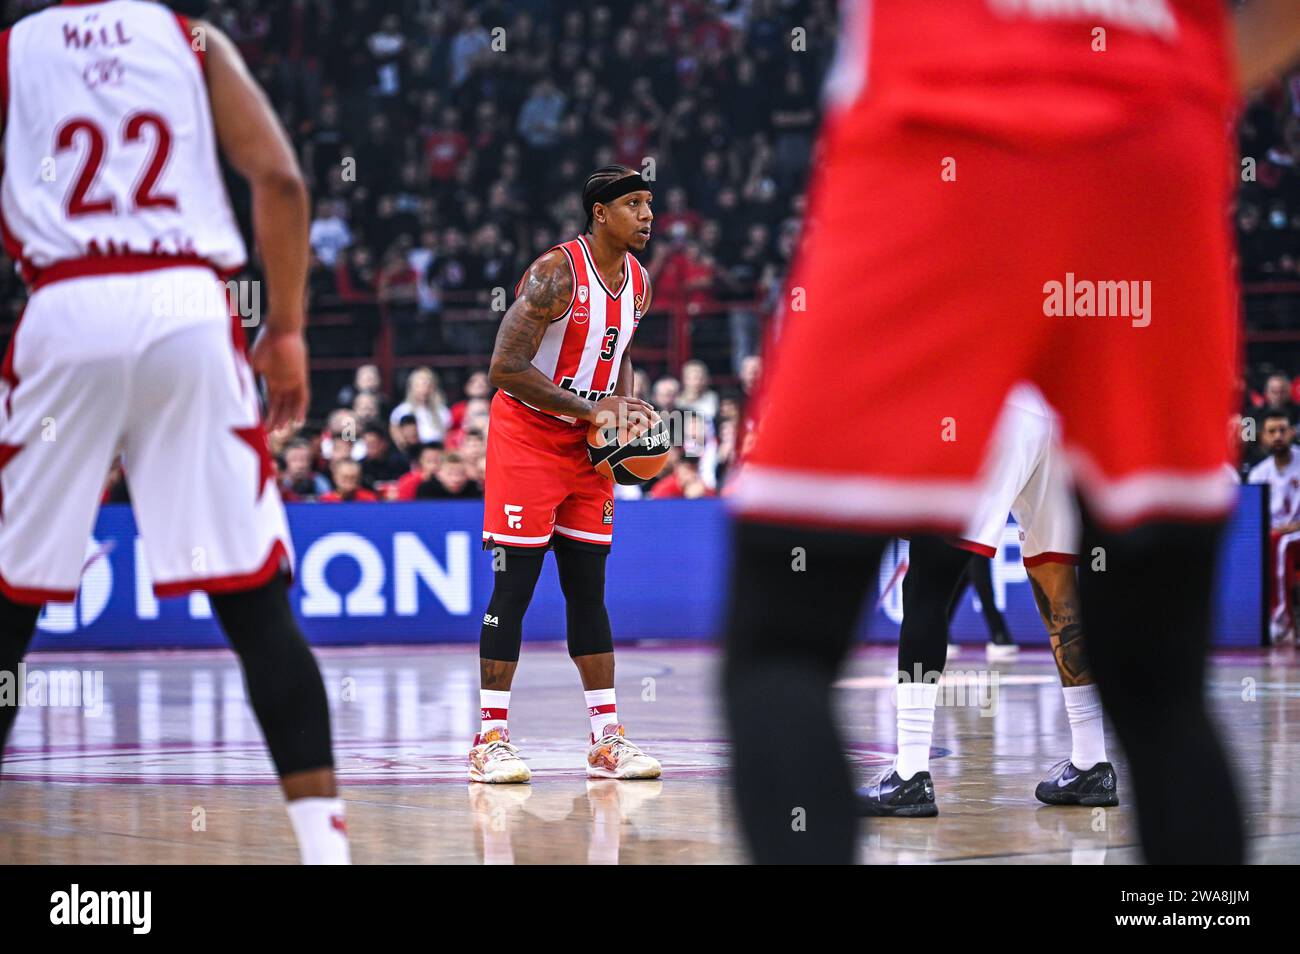 Piraeus Lombardy Greece 2nd Jan 2024 3 Isaiah Canaan Of Olympiacos Piraeus During The Euroleague Round 18 Match Between Olympiacos Piraeus And Ea7 Emporio Armani Milan At Peace Friendship Stadium On January 2 2024 In Piraeus Greece Credit Image Stefanos Kyriaziszuma Press Wire Editorial Usage Only! Not For Commercial Usage! 2WA8JJM 